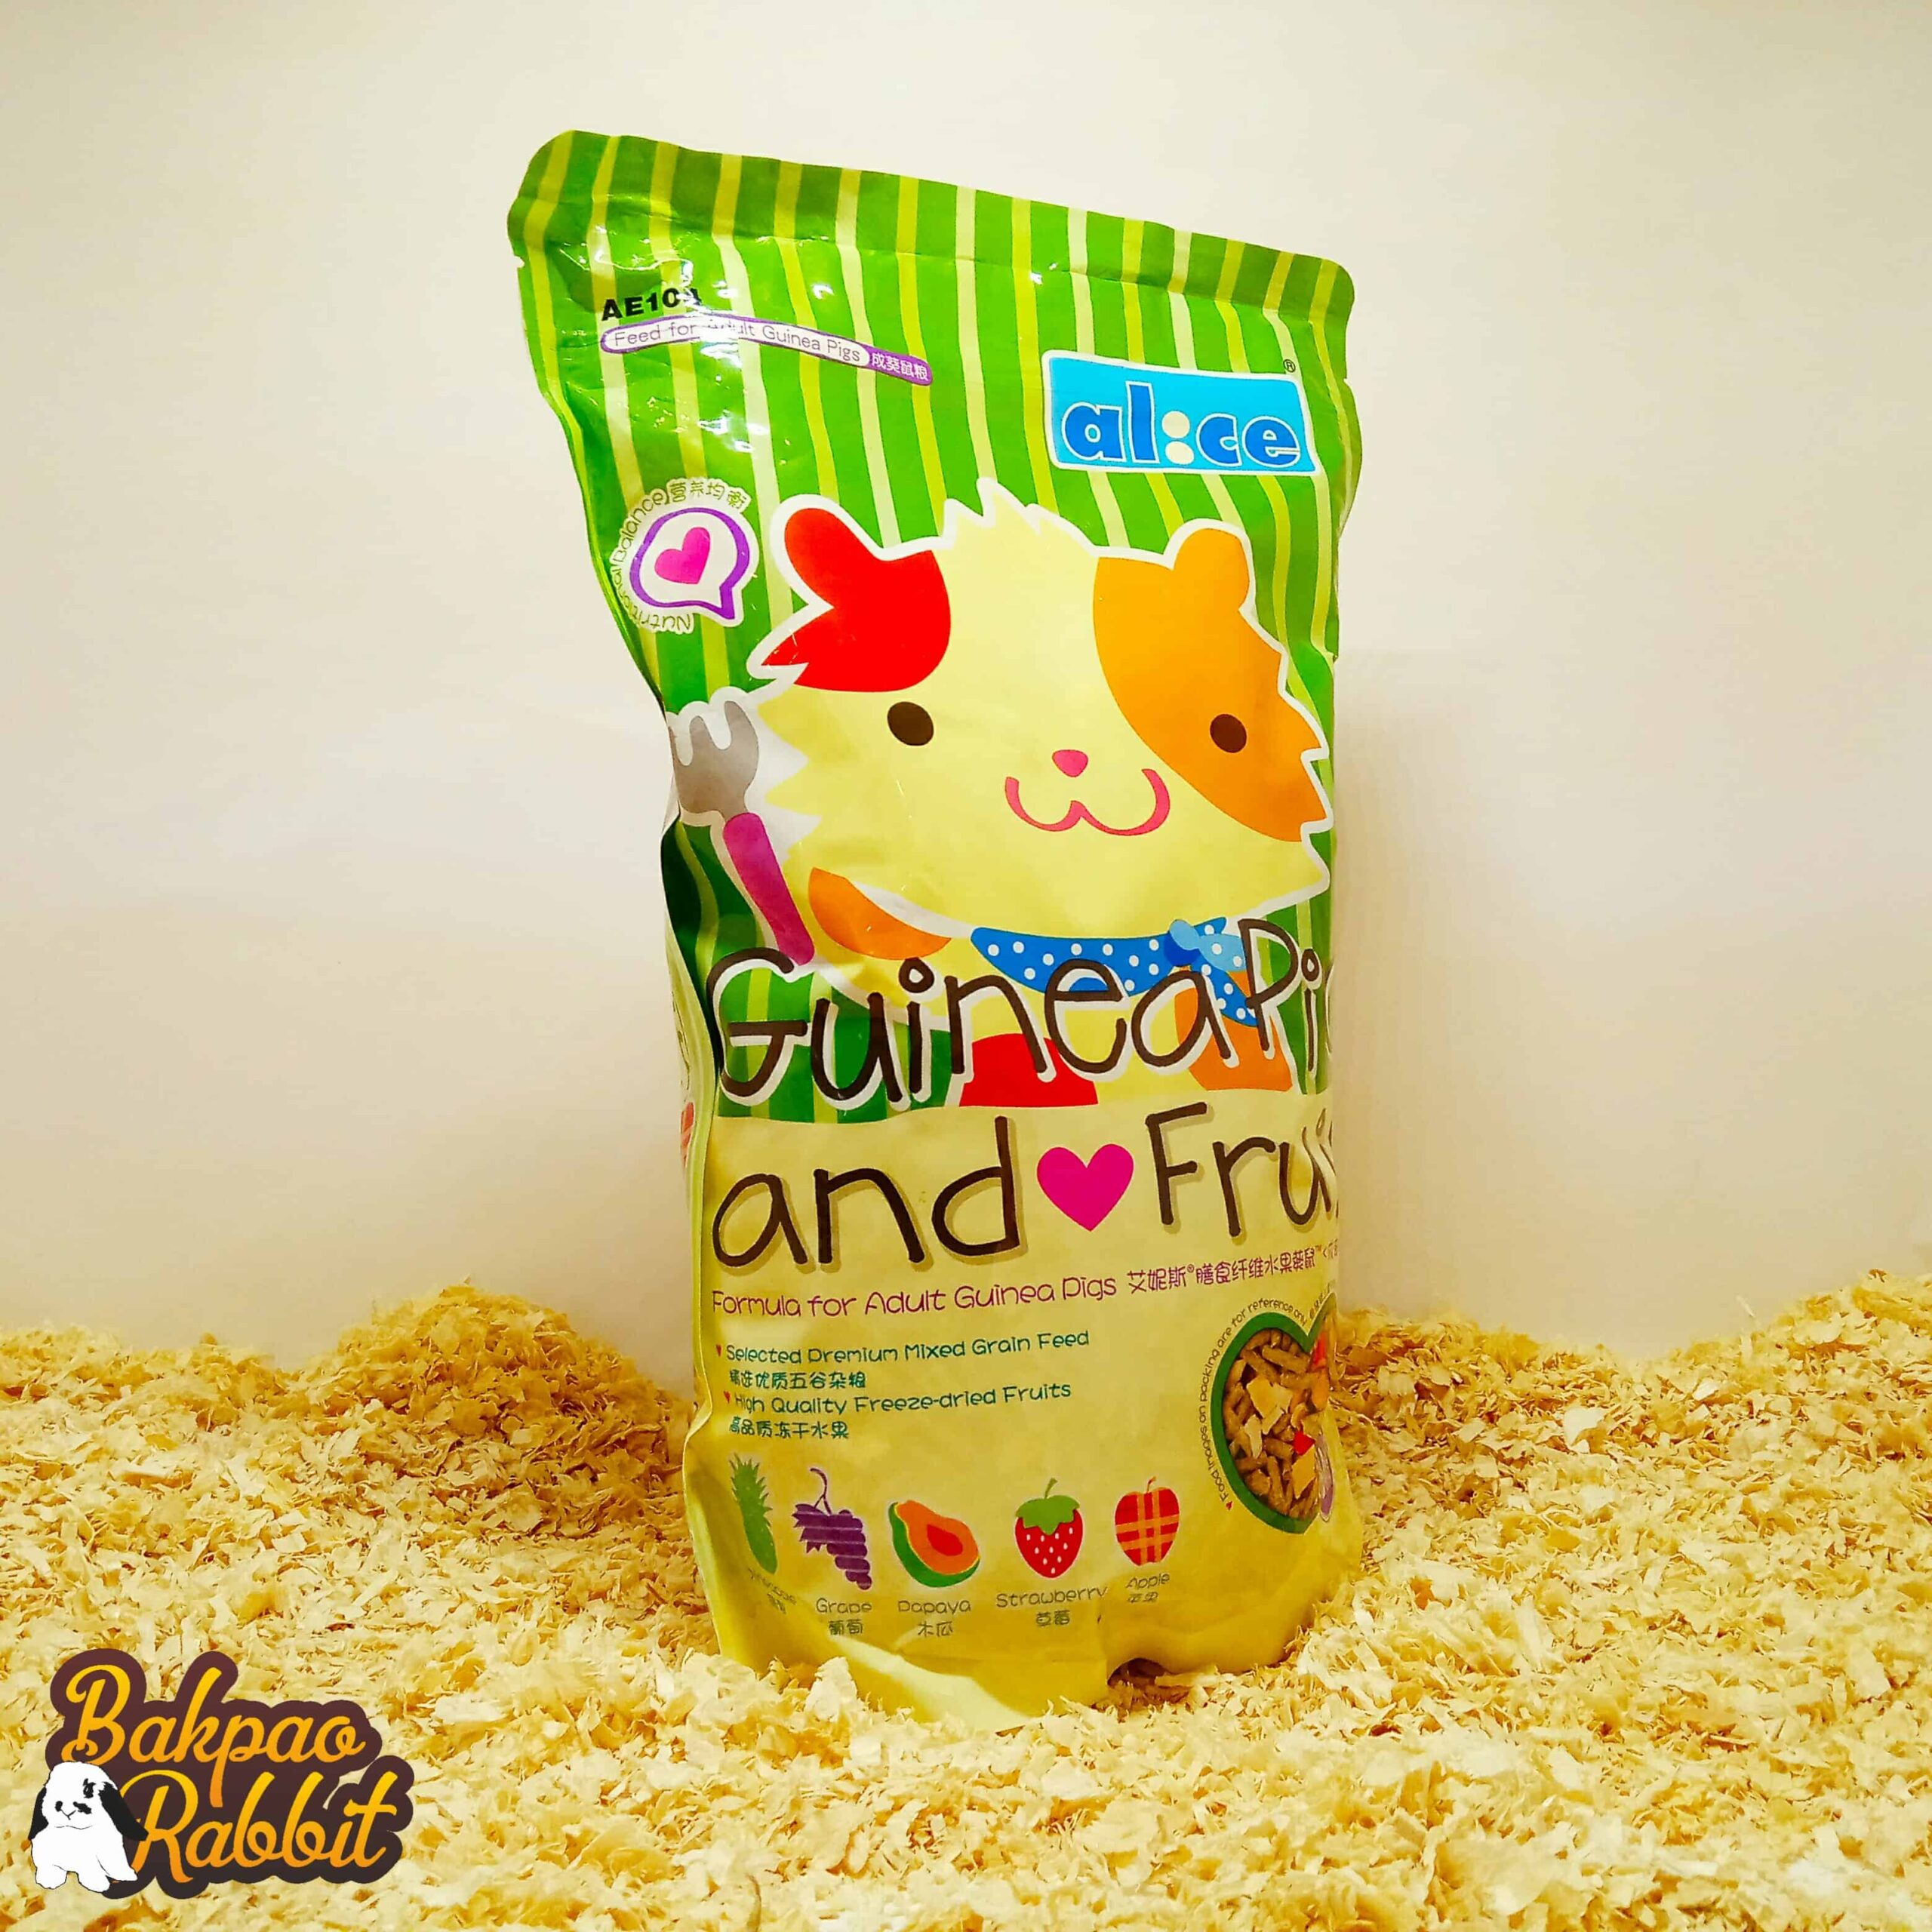 Alice AE104 Adult Guinea Pig and Fruit 1kg